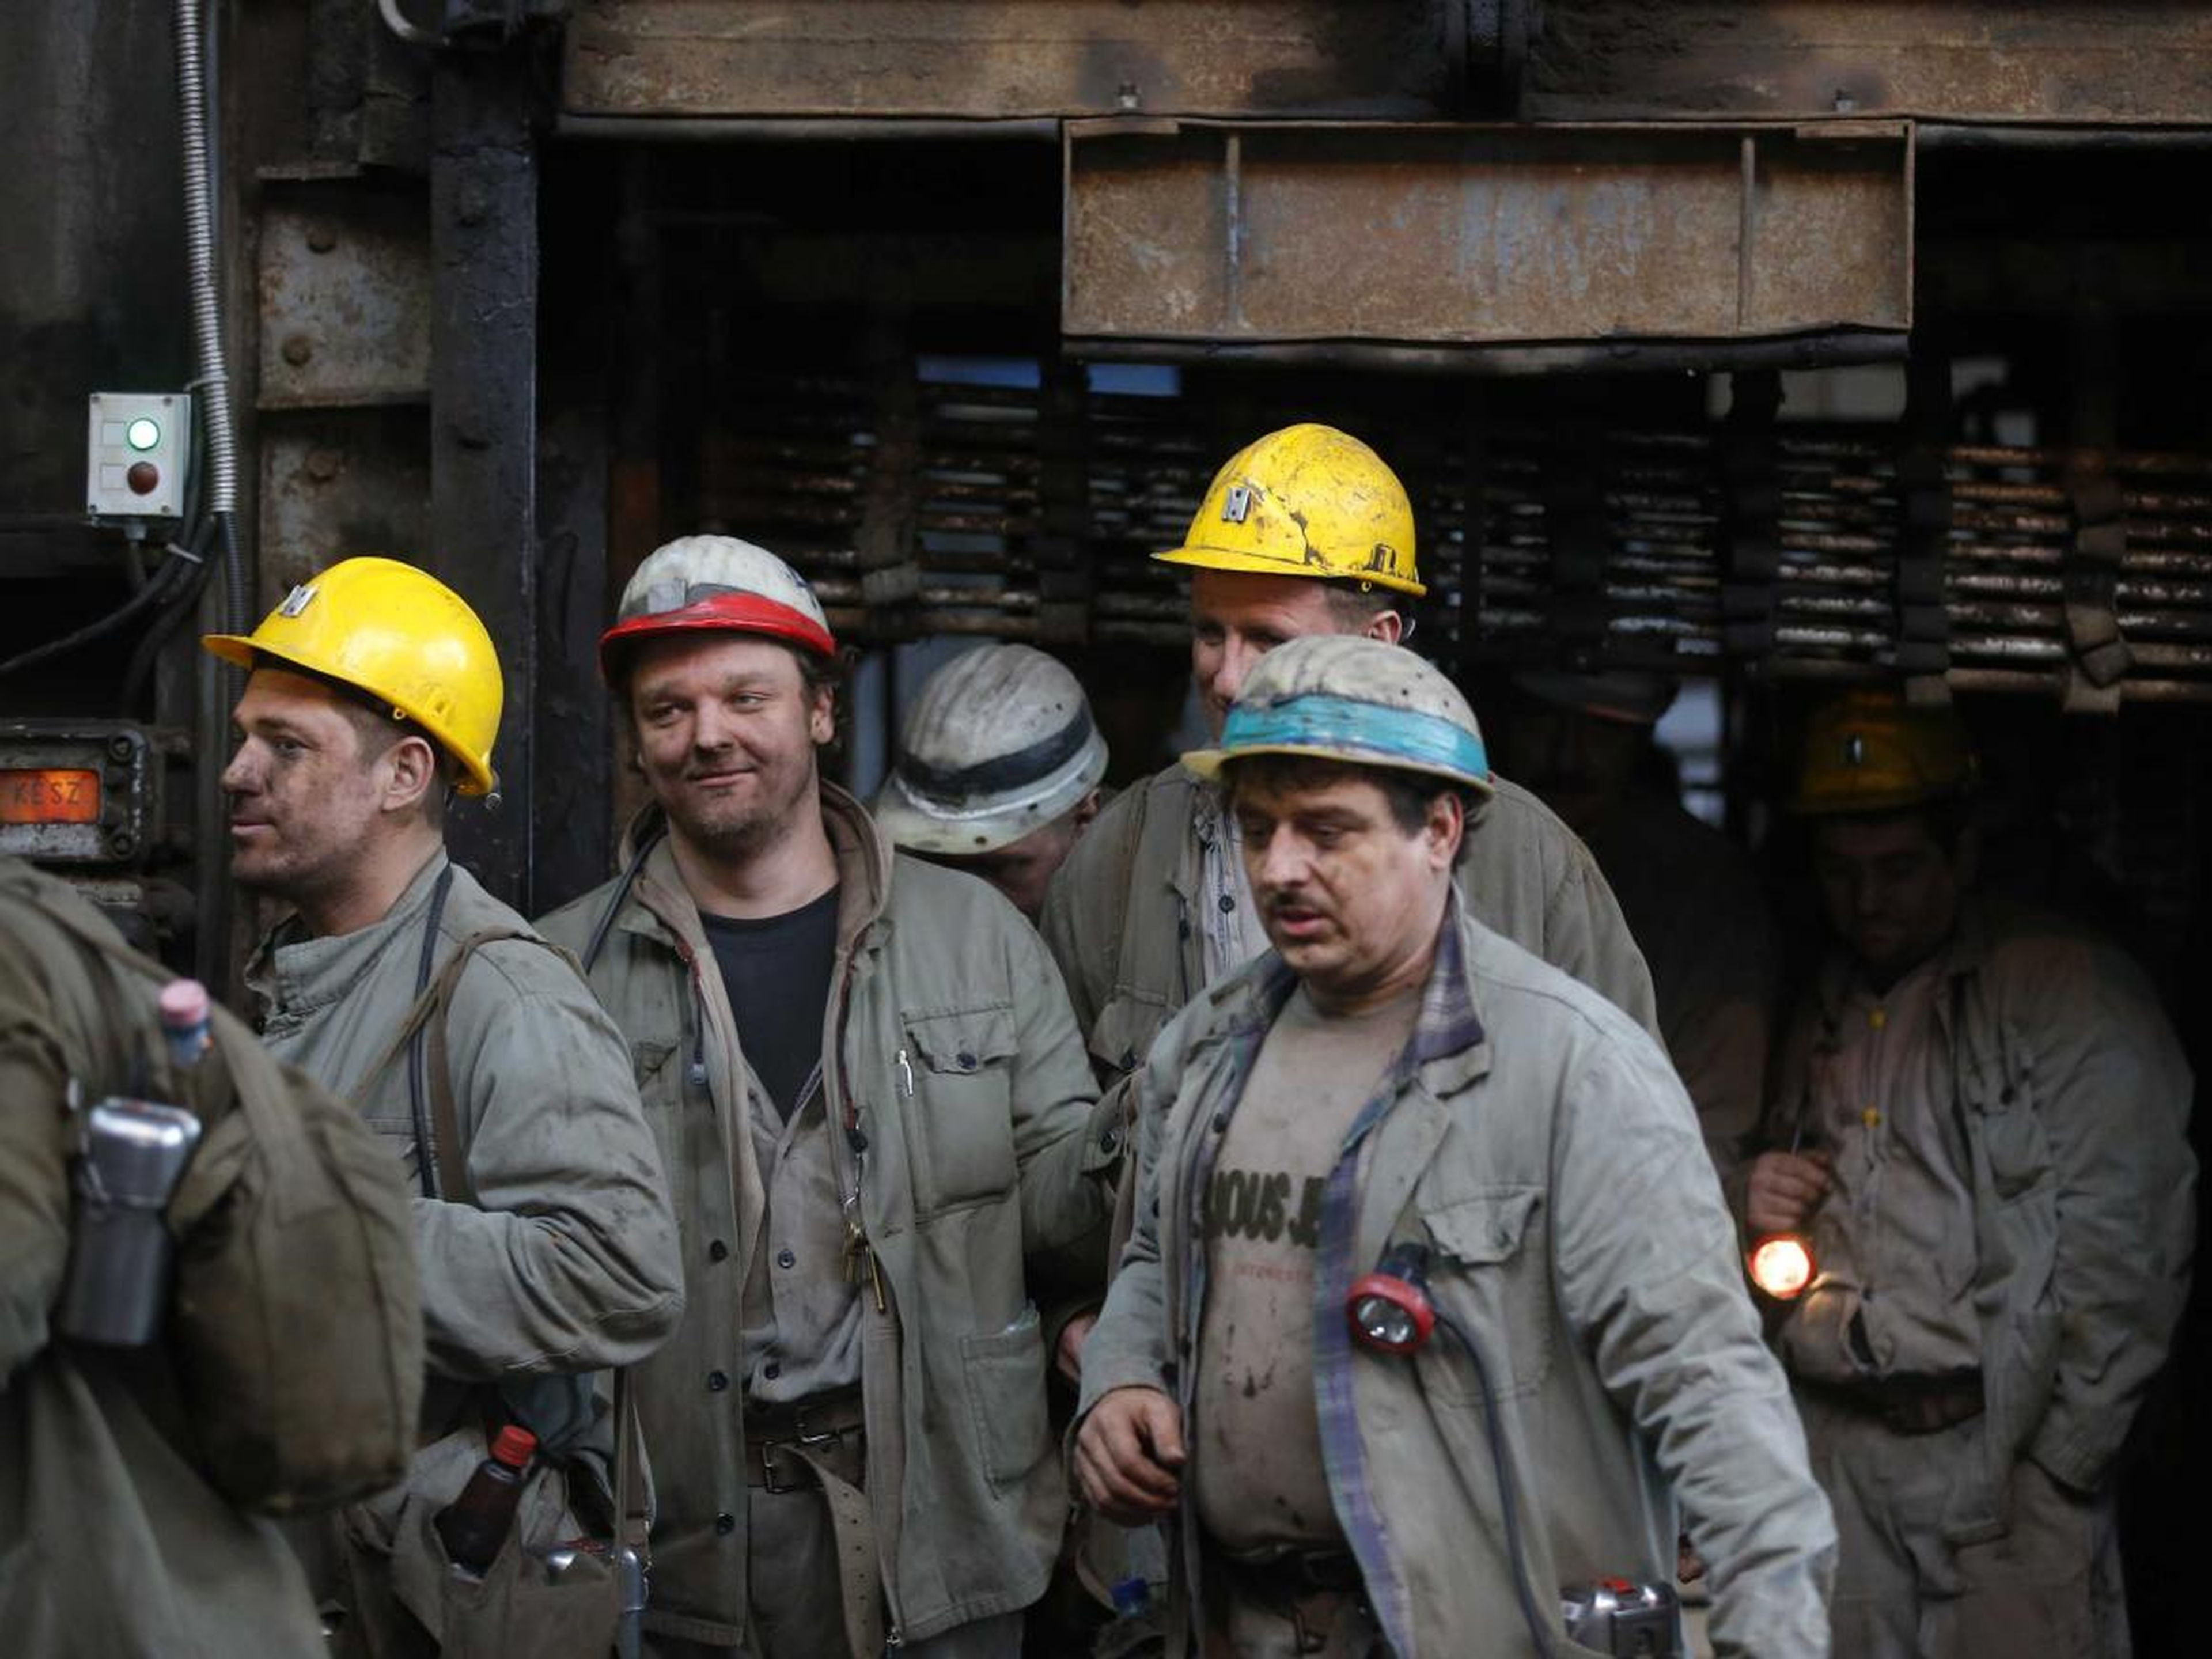 6. Coal mining had a 25% decline in employment between 2013 and 2018. 93.8% of workers in the industry in 2018 were men.